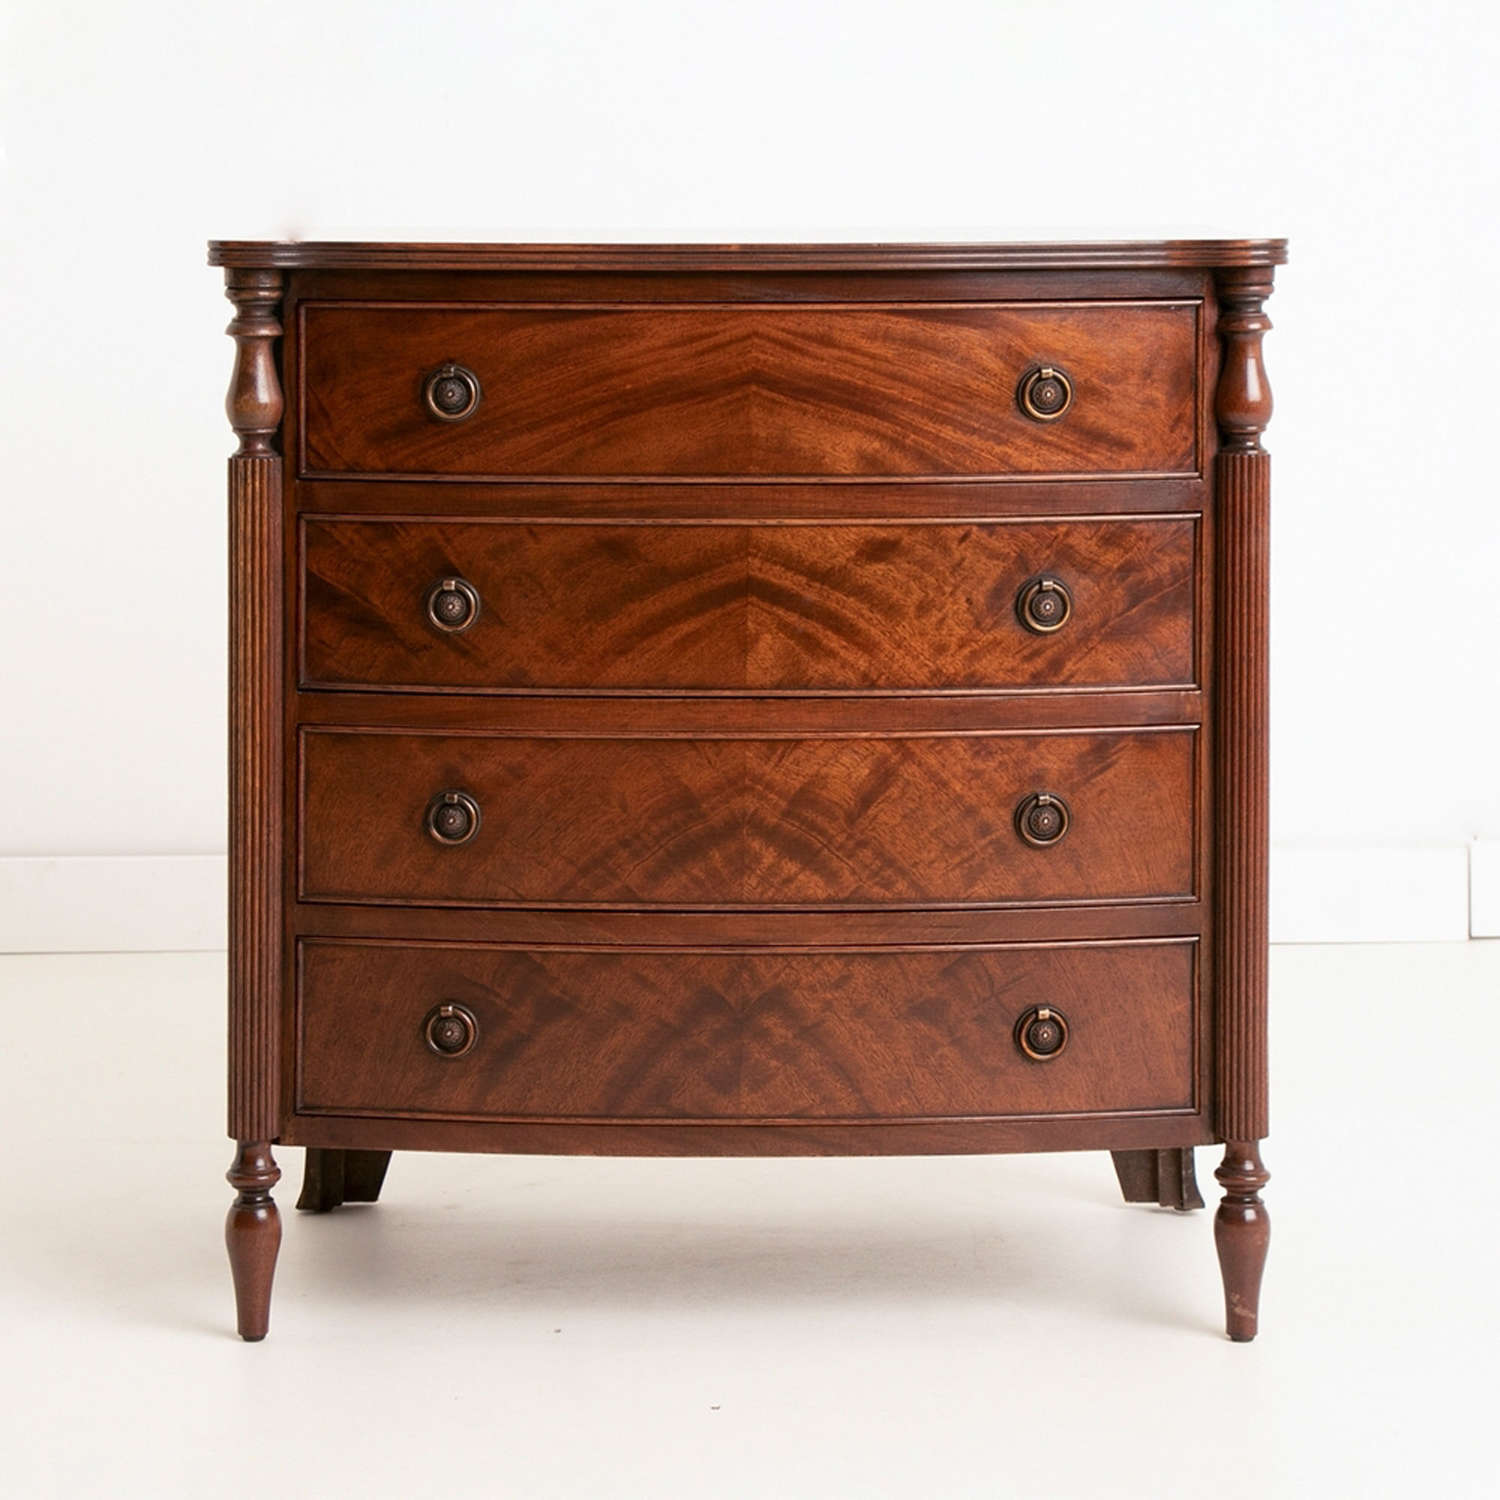 Small Mahogany Chest of Drawers with Fluted Columns